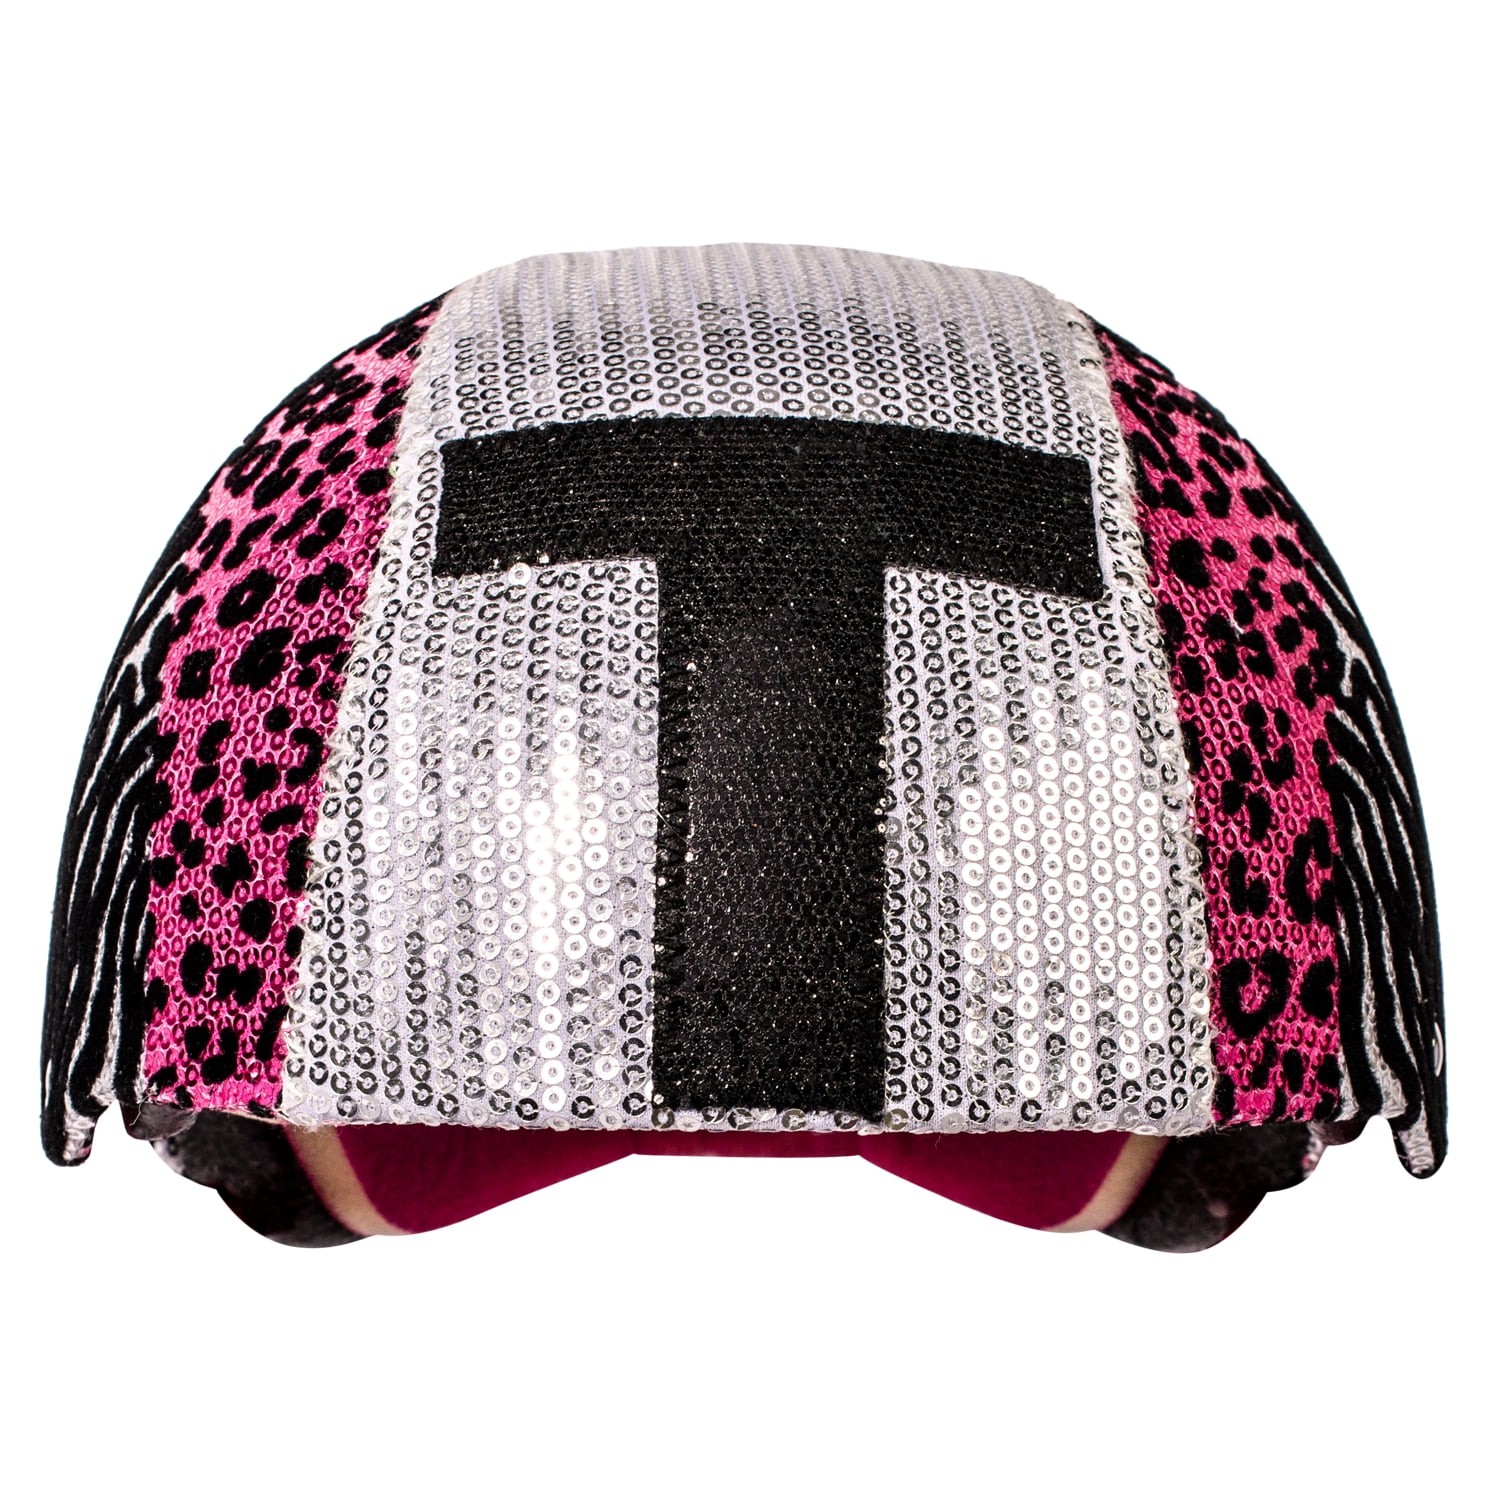 S -On the Go Glam Gear Helmet Raskullz for Justice Sequins Pink Leopard Ages 5+ 